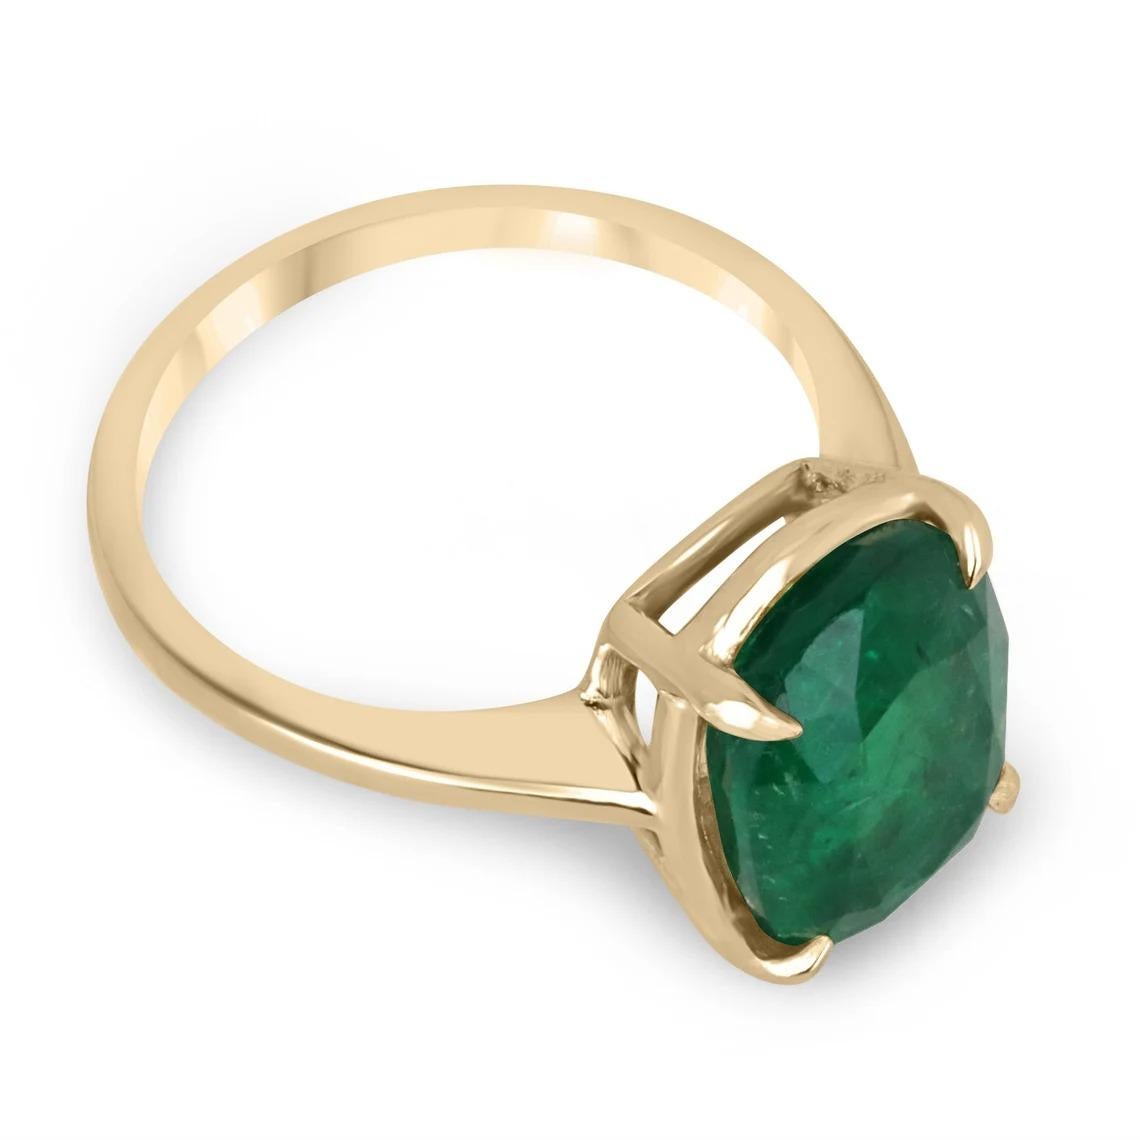 Displayed is a classic emerald solitaire, cushion-cut, engagement ring/right-hand ring in 14K yellow gold. This gorgeous solitaire ring carries a full 4.86-carat emerald in a classic prong setting. Fully faceted, this gemstone showcases excellent